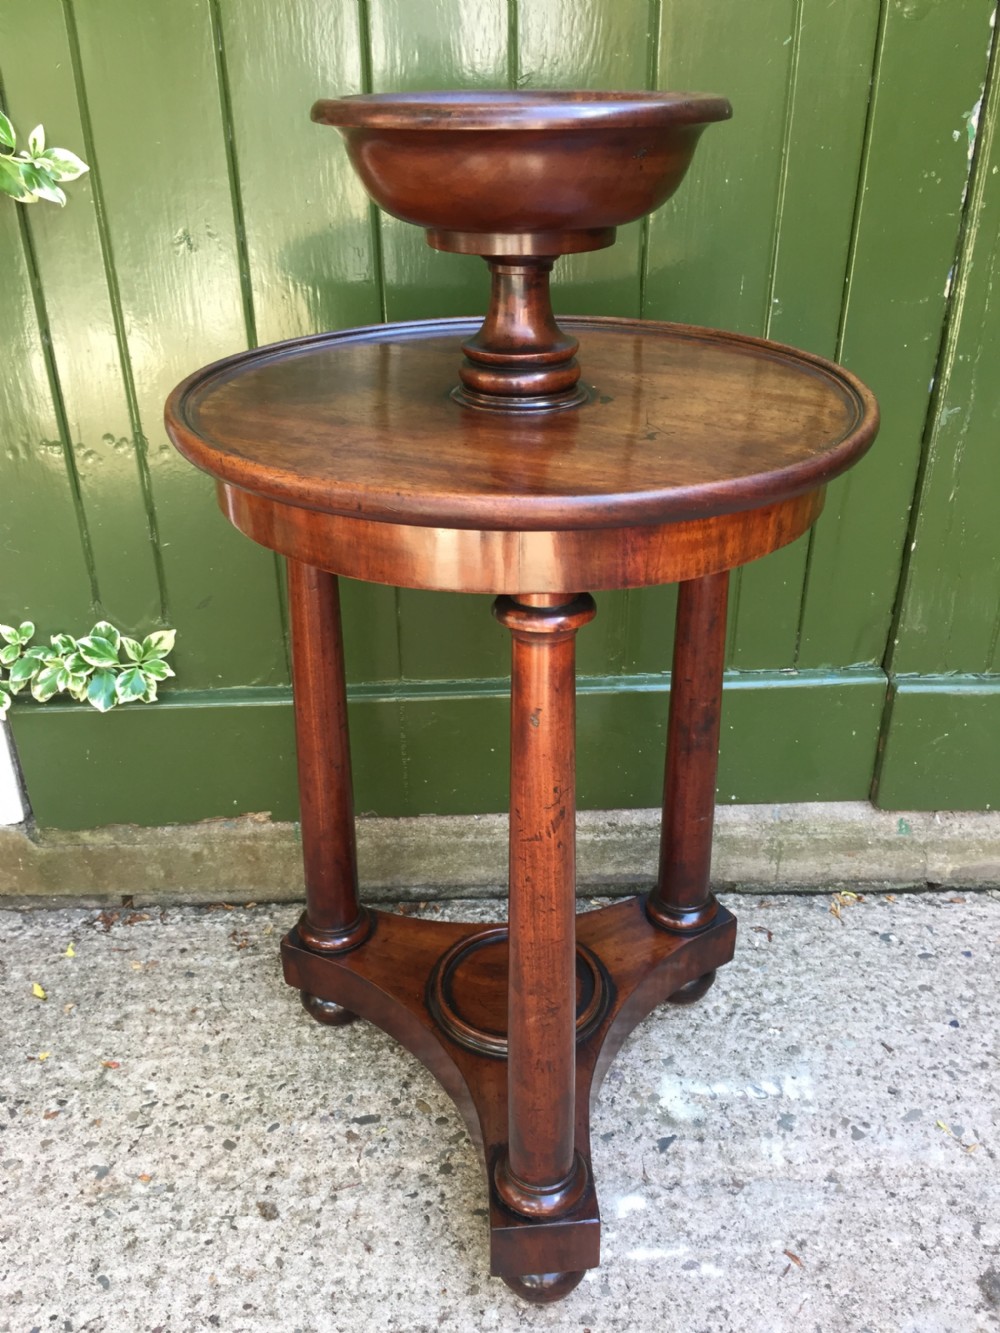 interesting and practical early c19th french circular mahogany bedside table or 'videpoche'